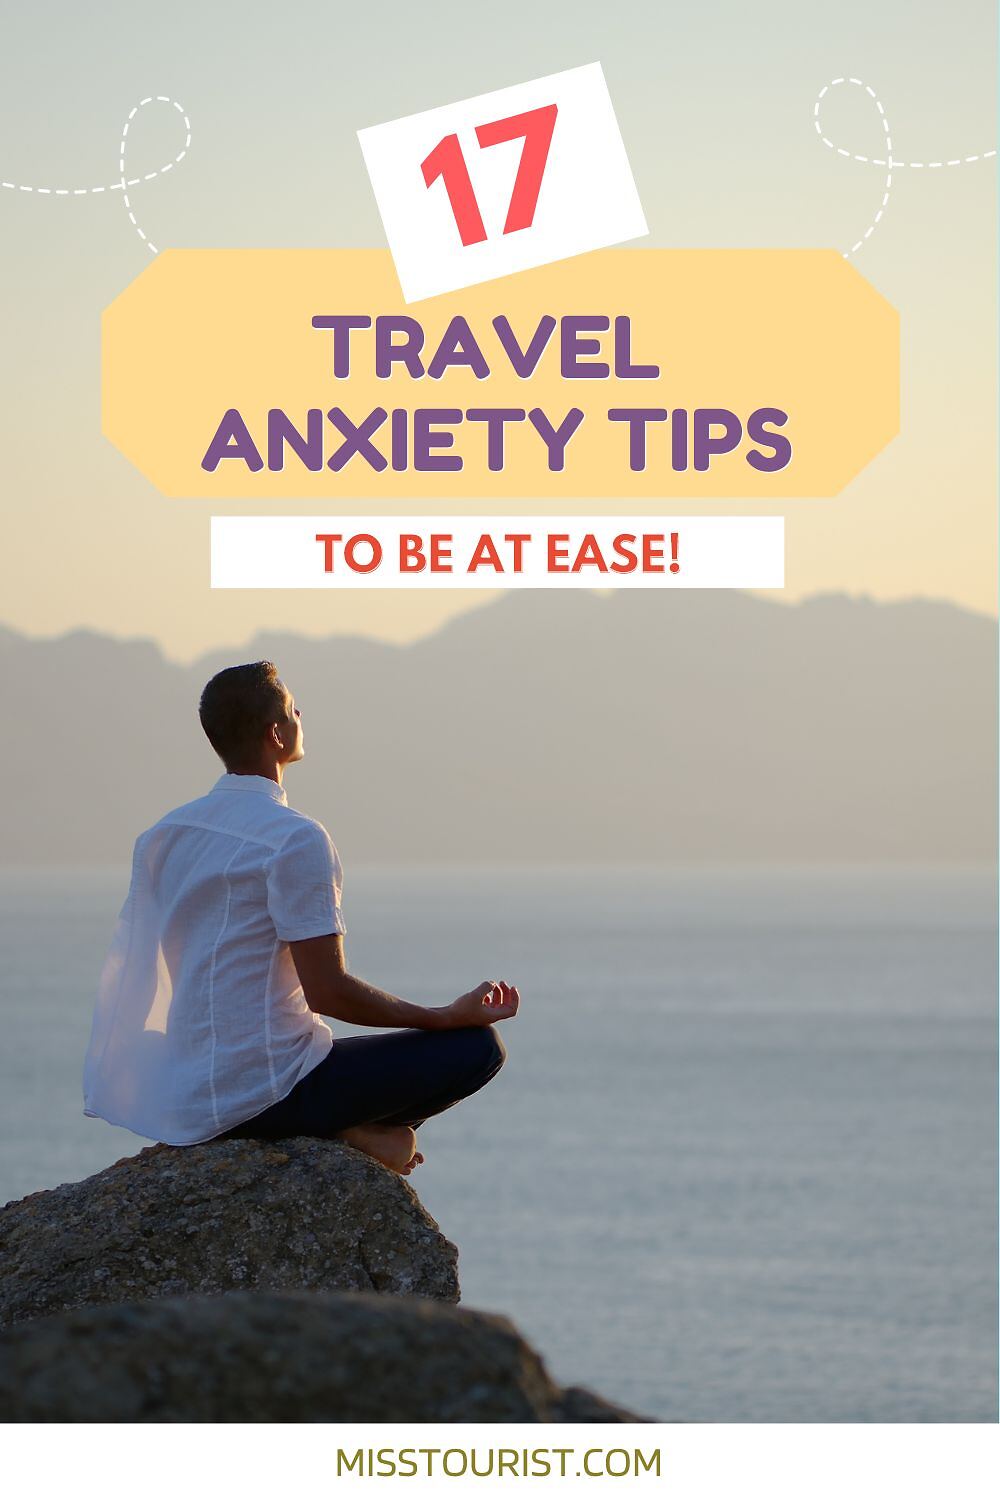 A person sits meditating on a rocky outcrop overlooking the sea with mountains in the distance. Text reads: "17 Travel Anxiety Tips to Be at Ease! misstourist.com.